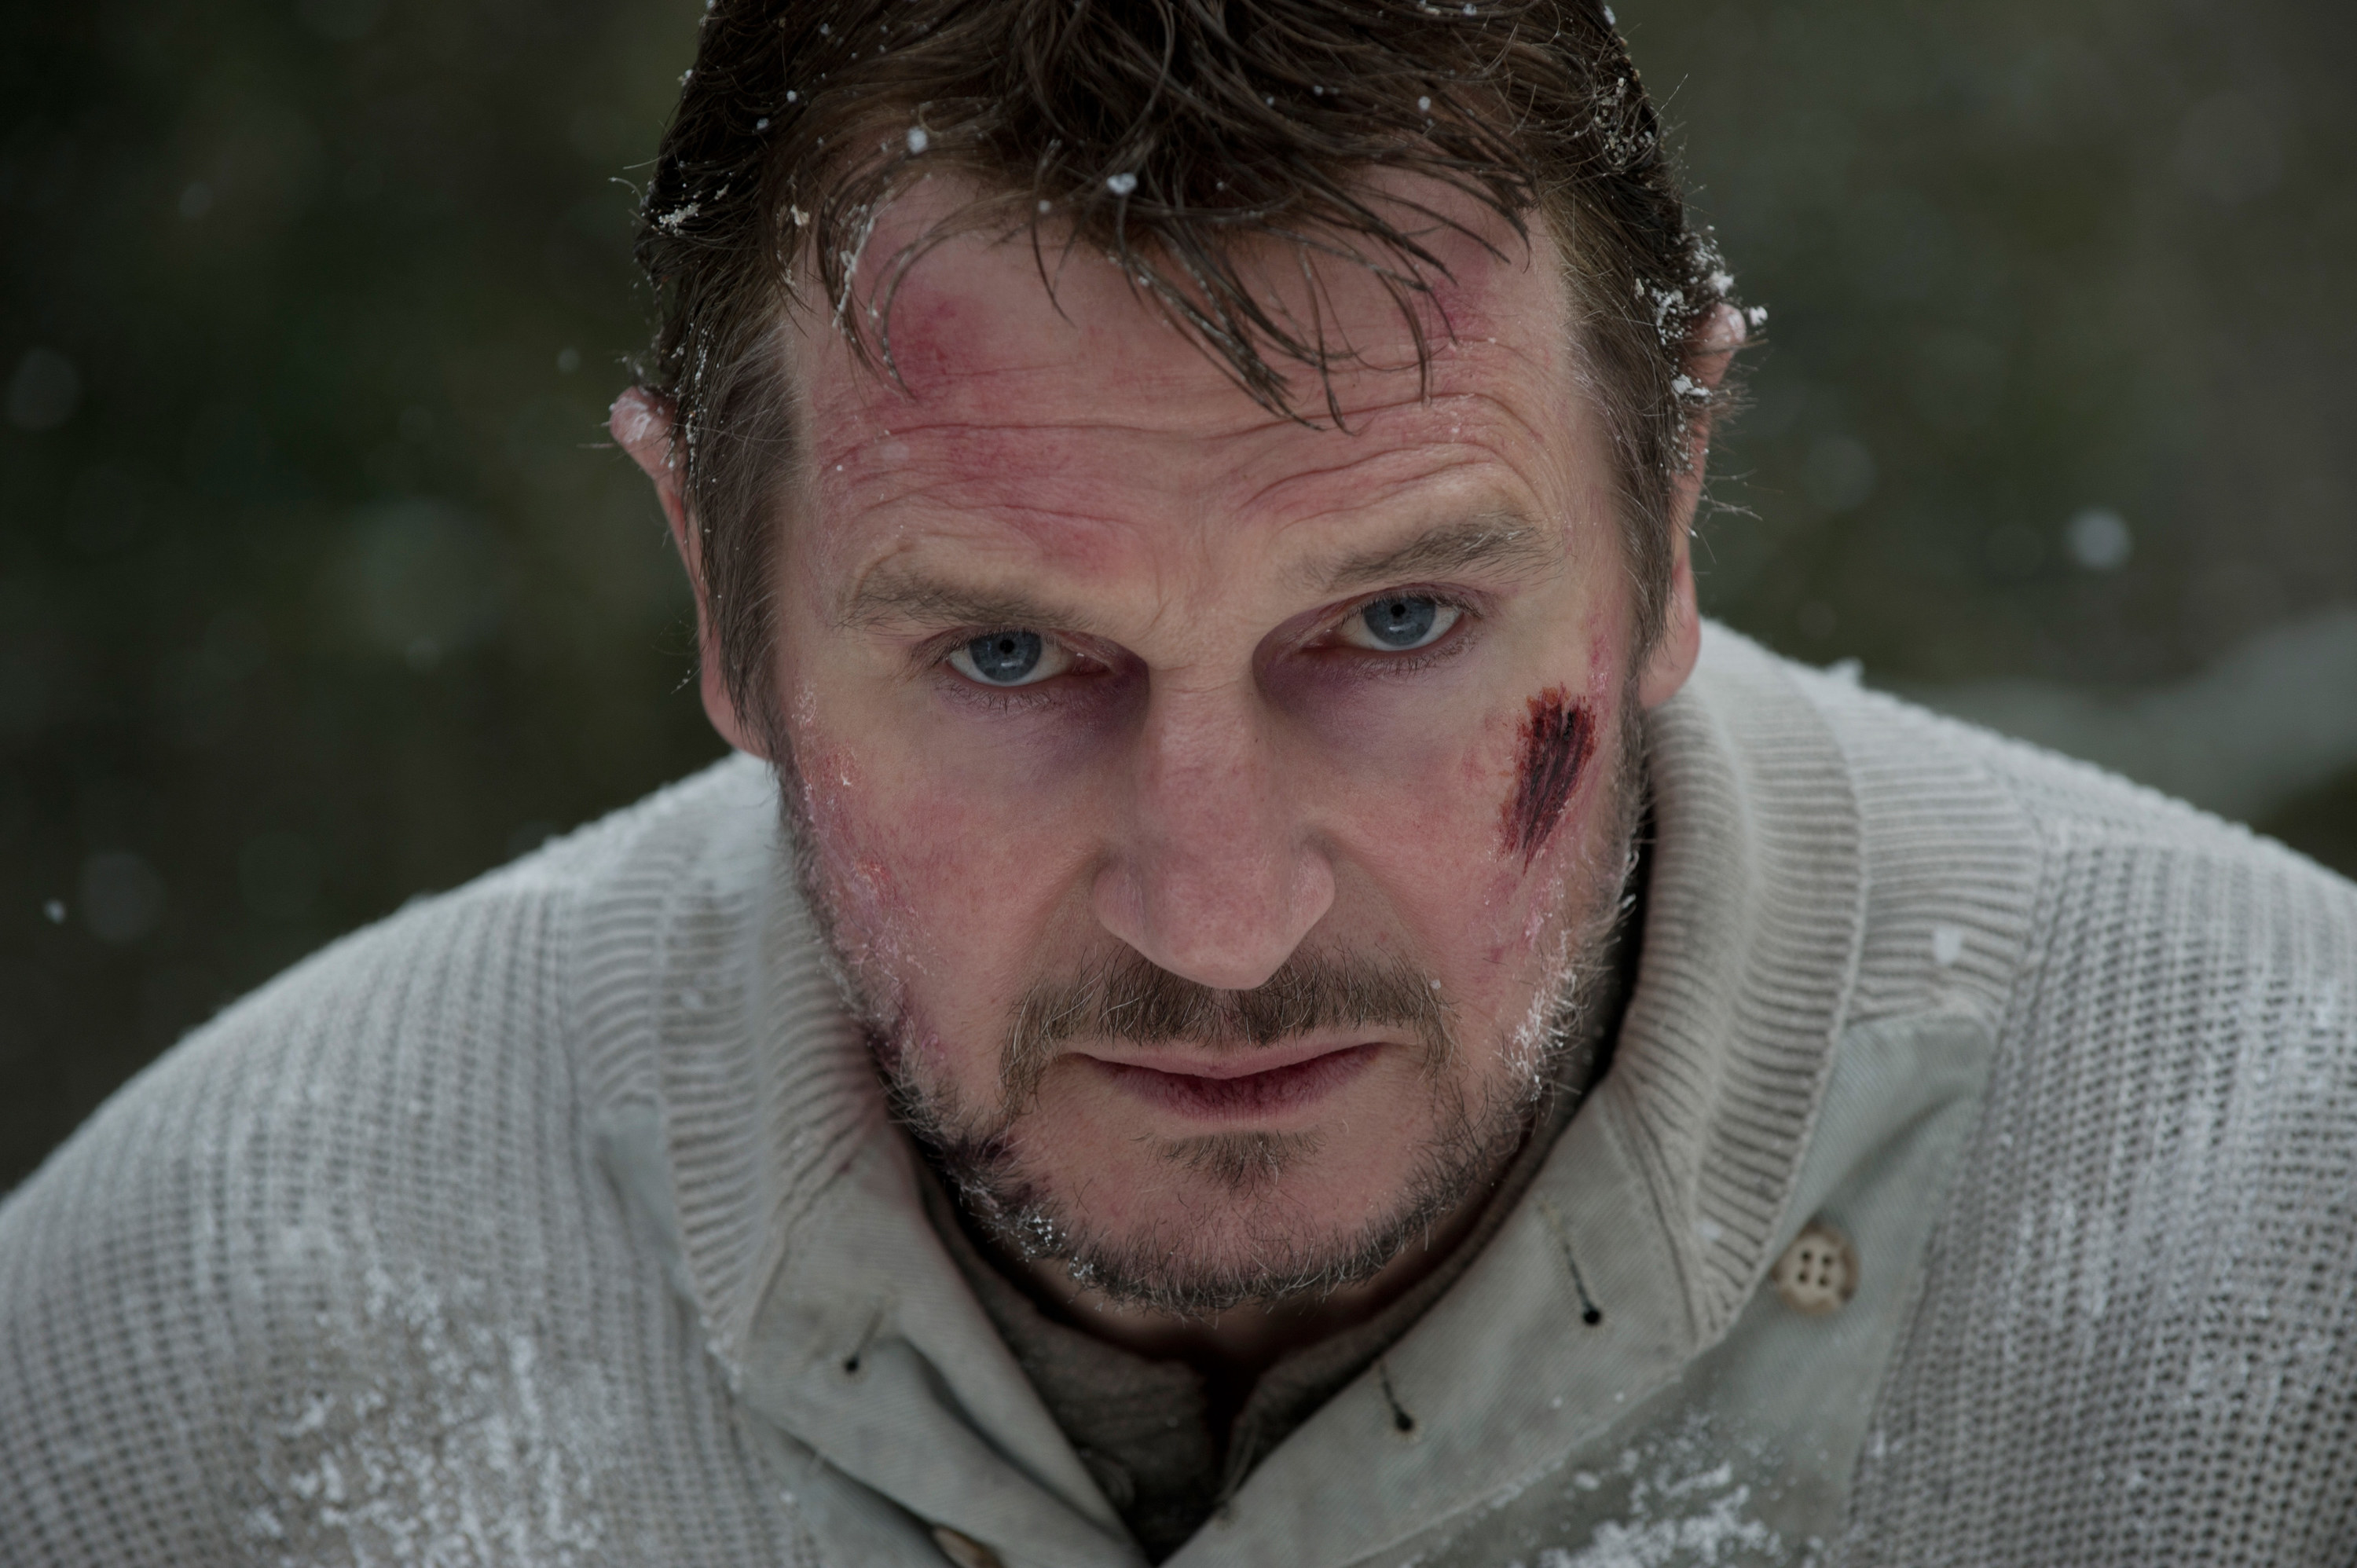 A close-up on a bloodied man in the snow